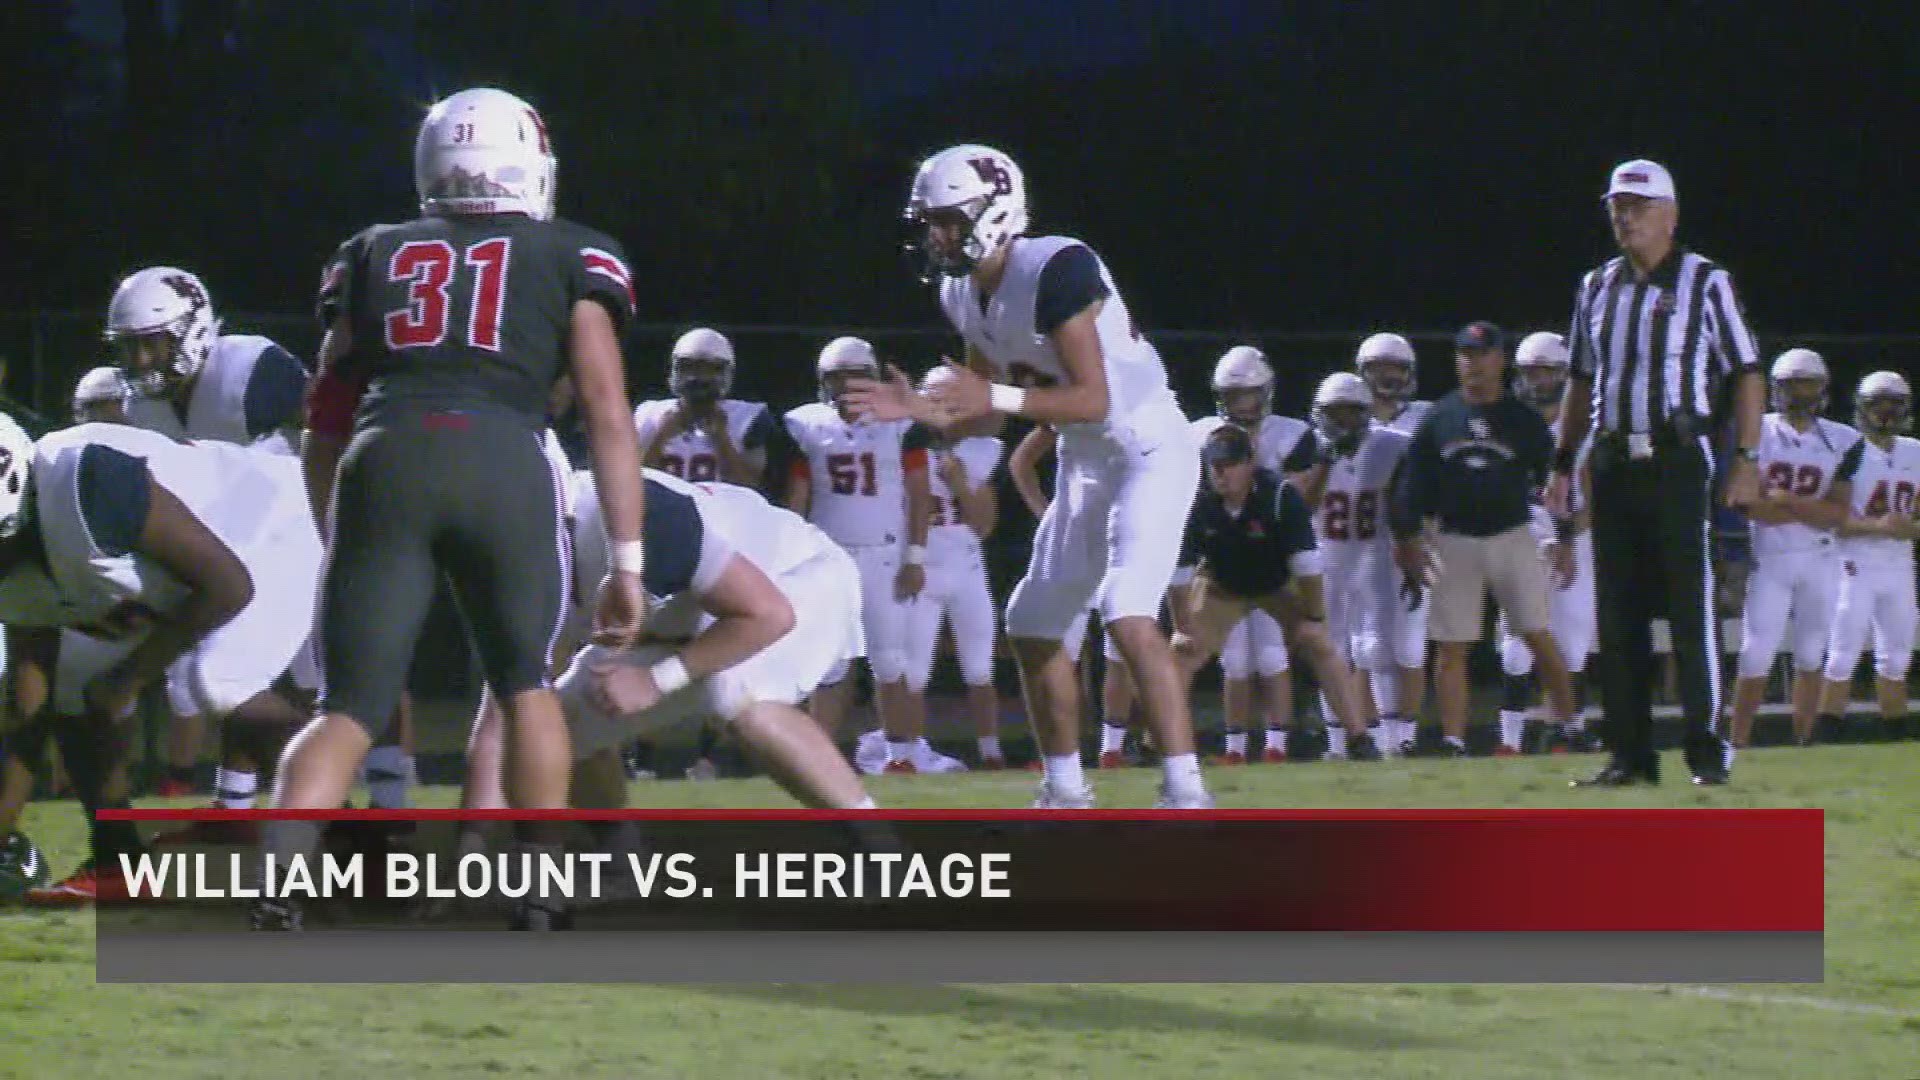 Heritage hangs on to the bell, beating William Blount for the second straight year.